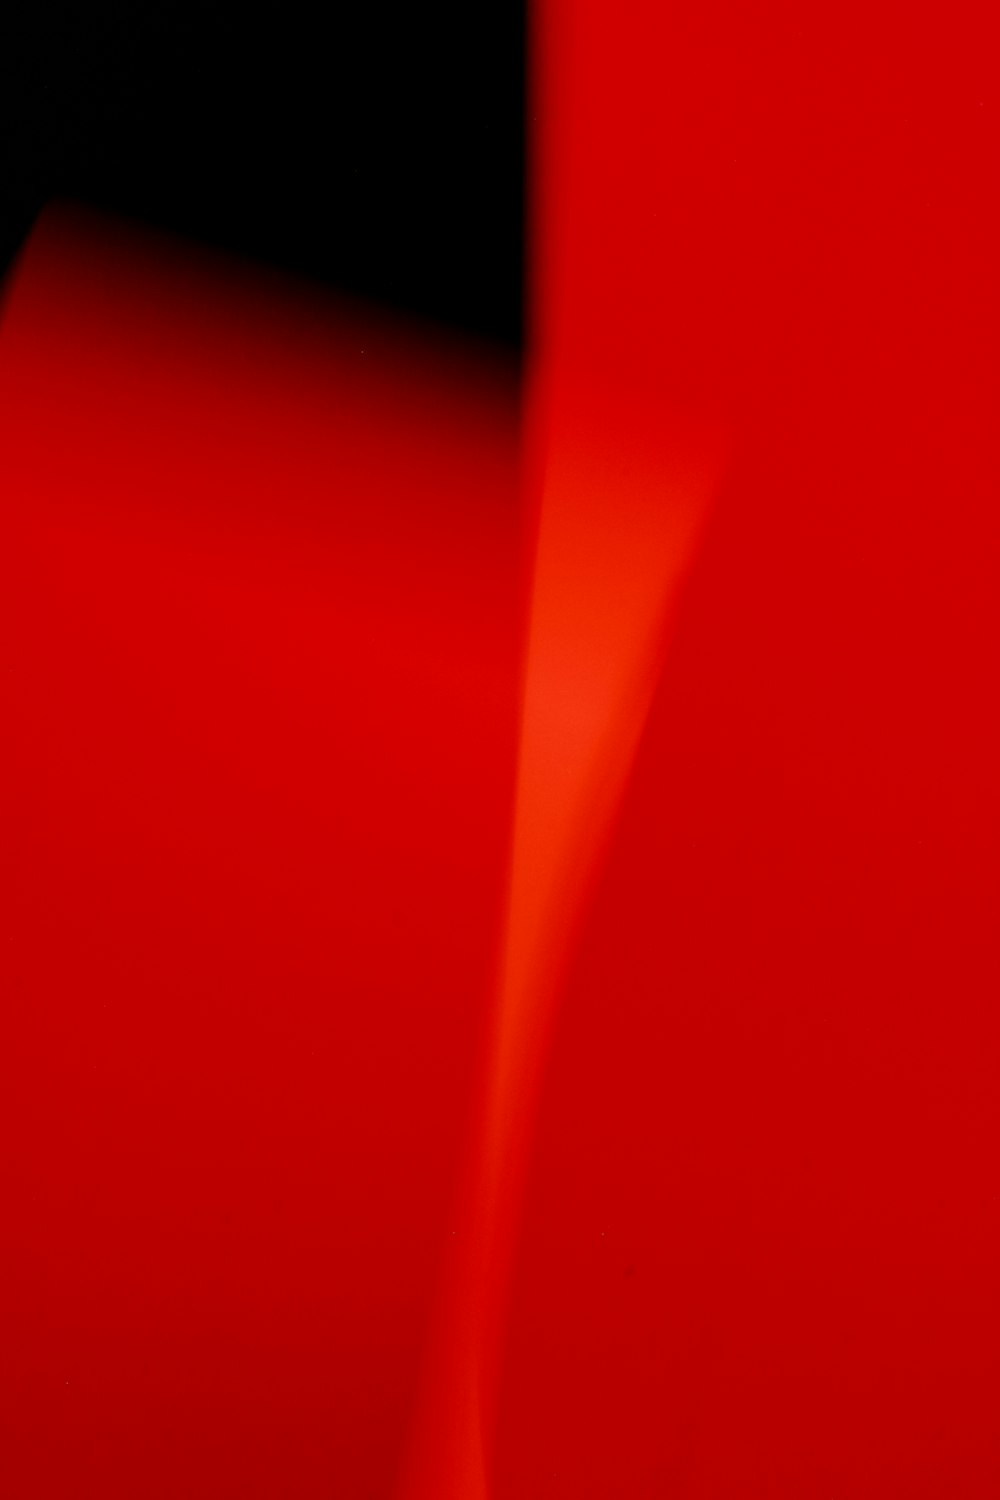 a close up of a red object with a black background